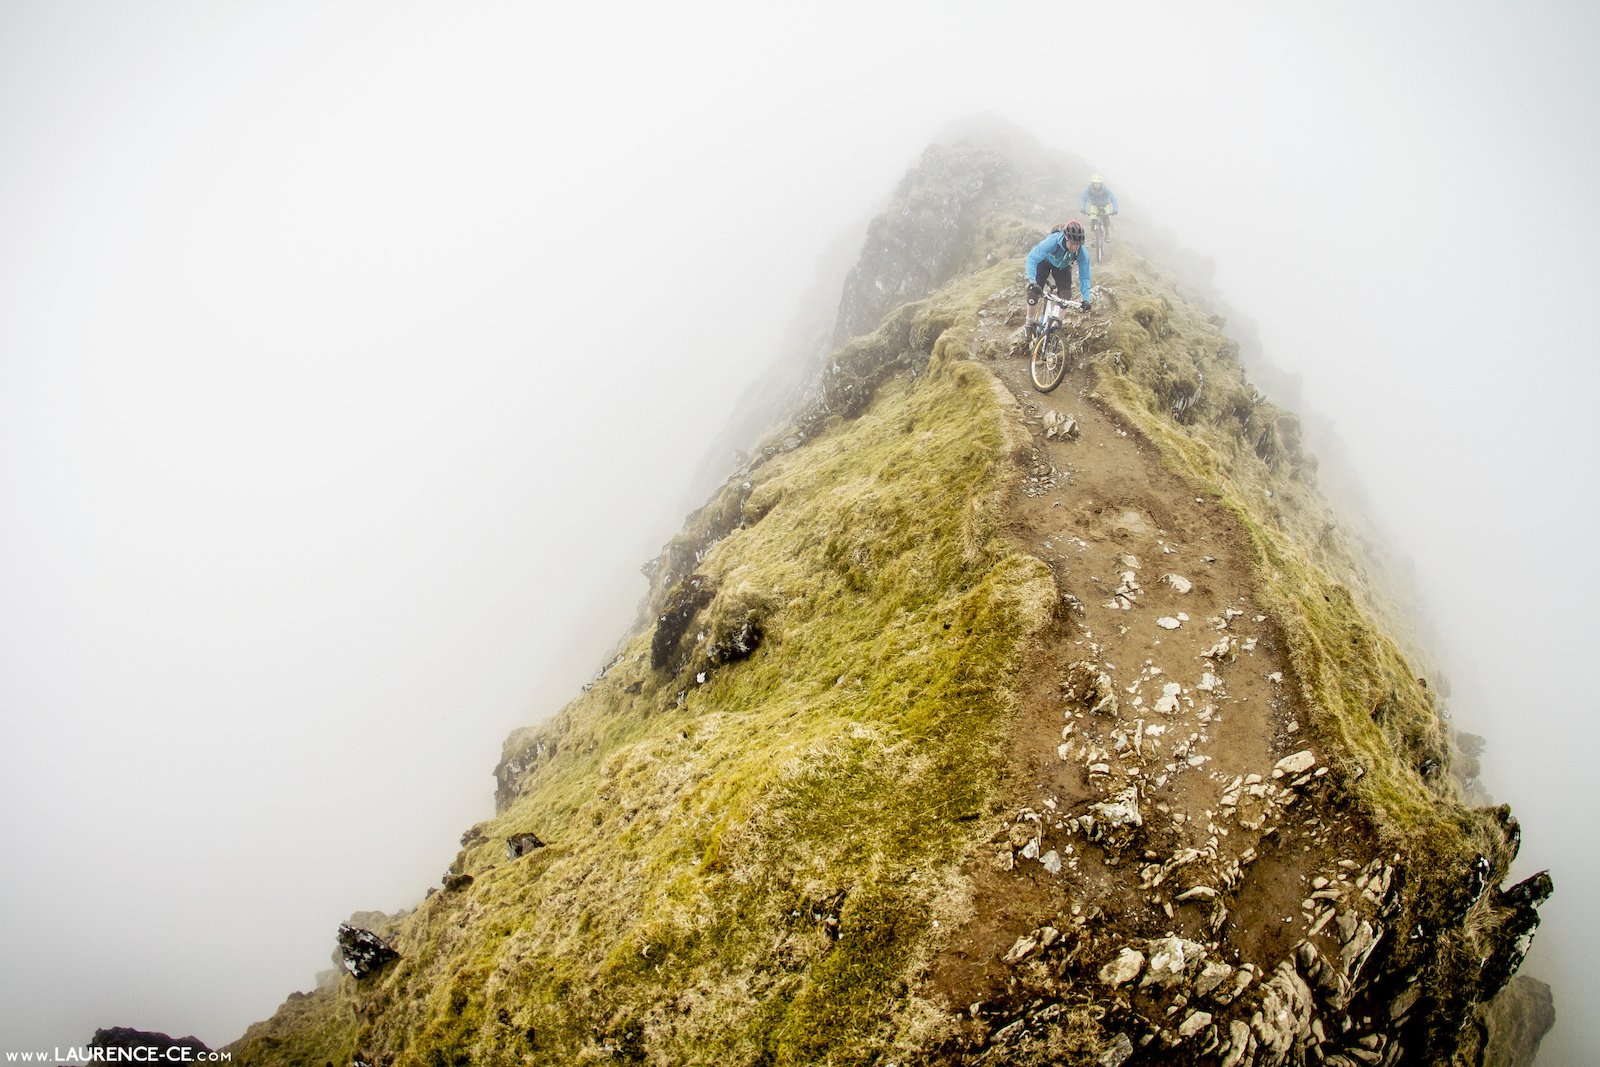 Unpredictable weather and extreme exposure can turn riding adventures into extreme situations. Knife edging along Rhyd Ddu on Snowdon became rather exciting - Laurence CE - www.laurence-ce.com